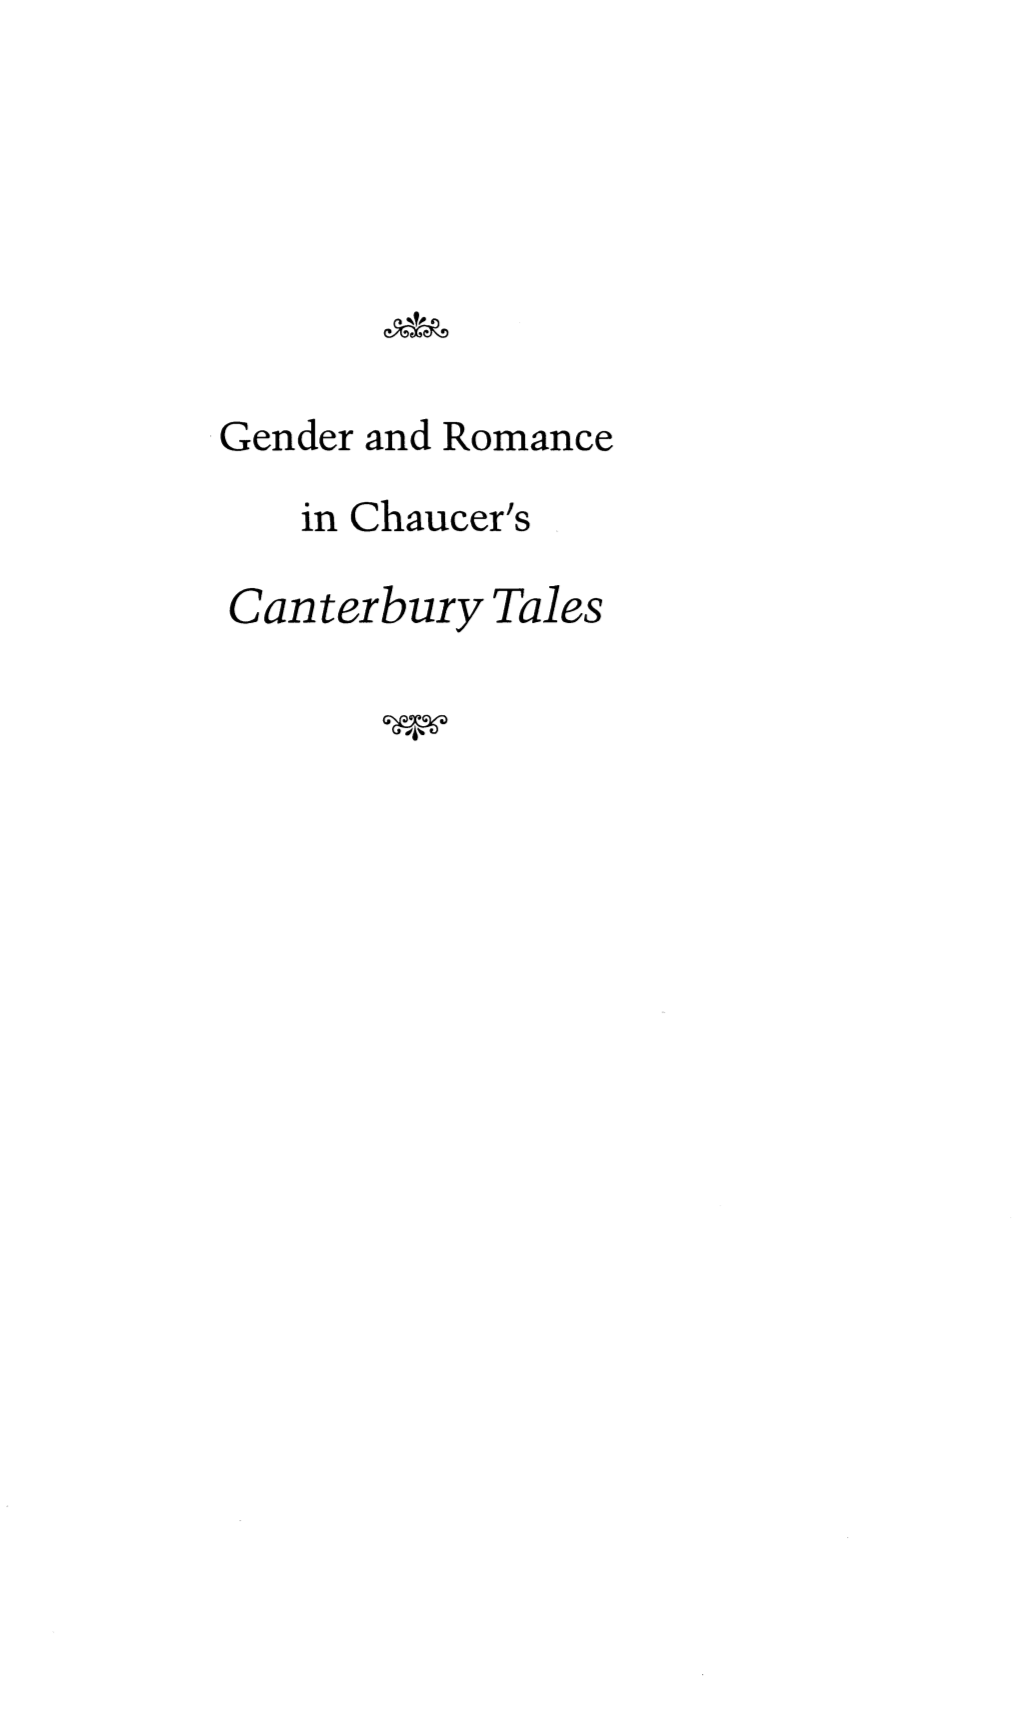 Canterbury Tales Gender and Romance in Chaucer's